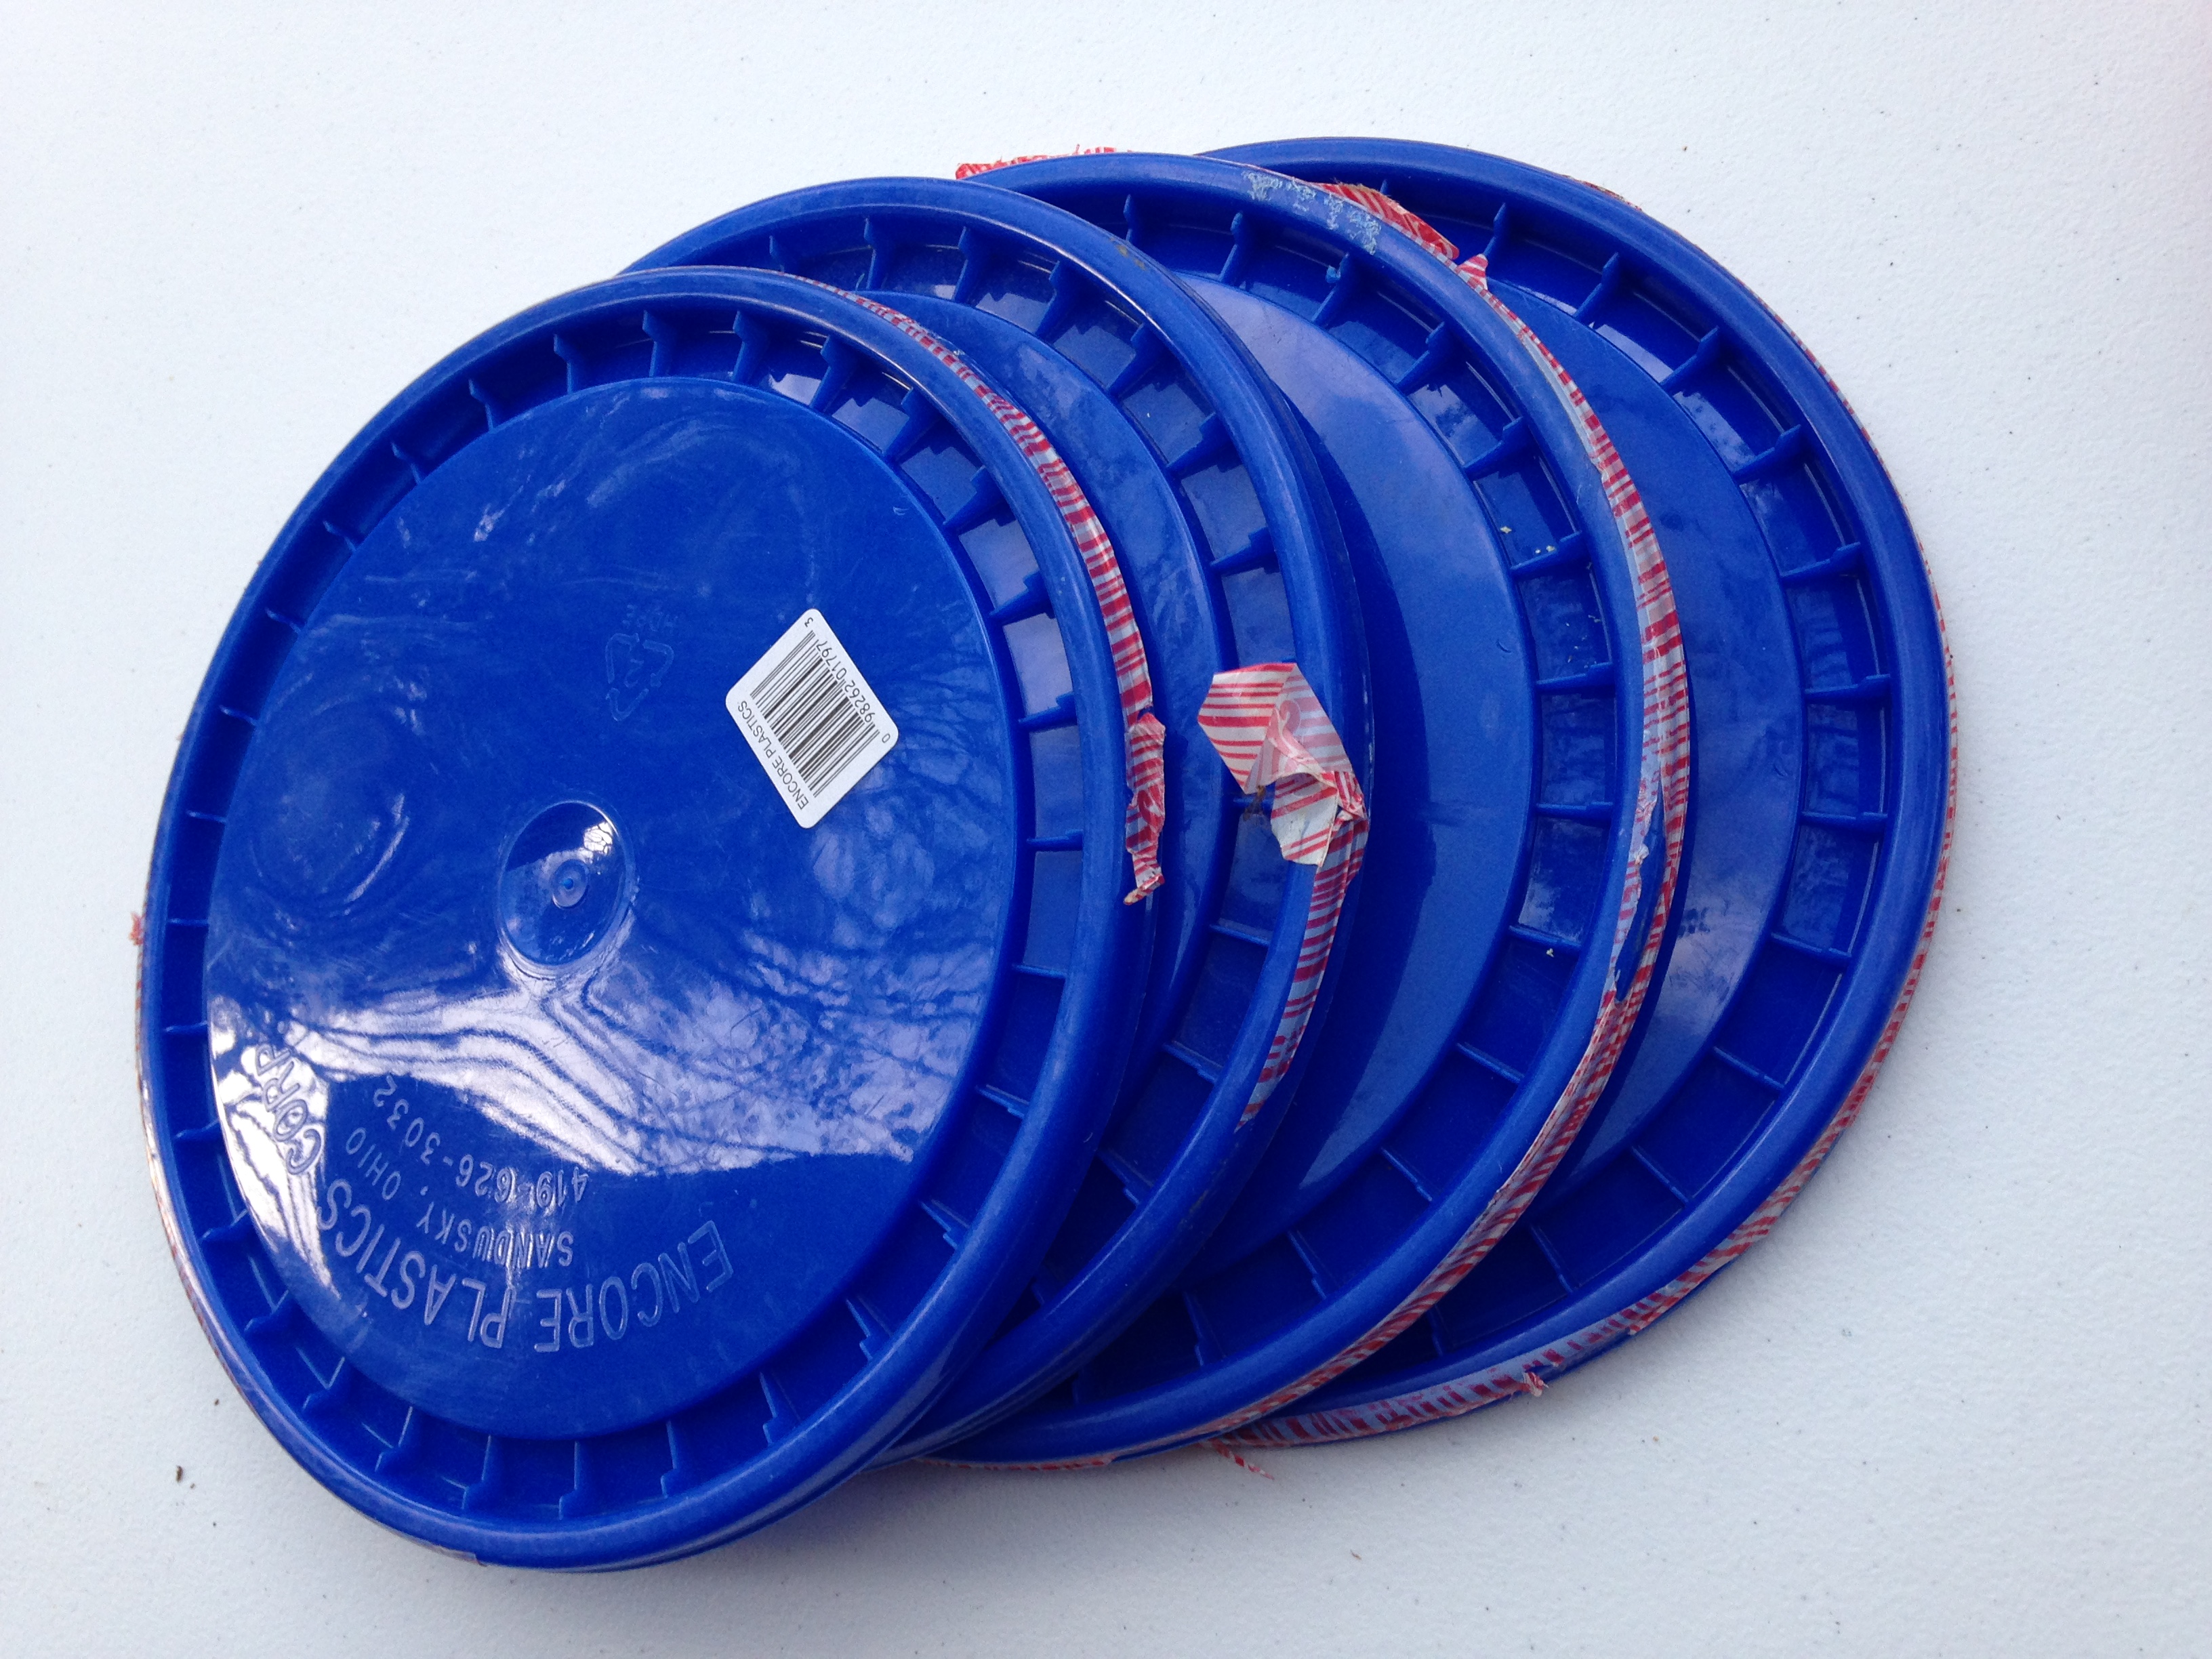 Used   Lowes 53000 Set of 4 Blue Lids for 5-Gallon Bucket...